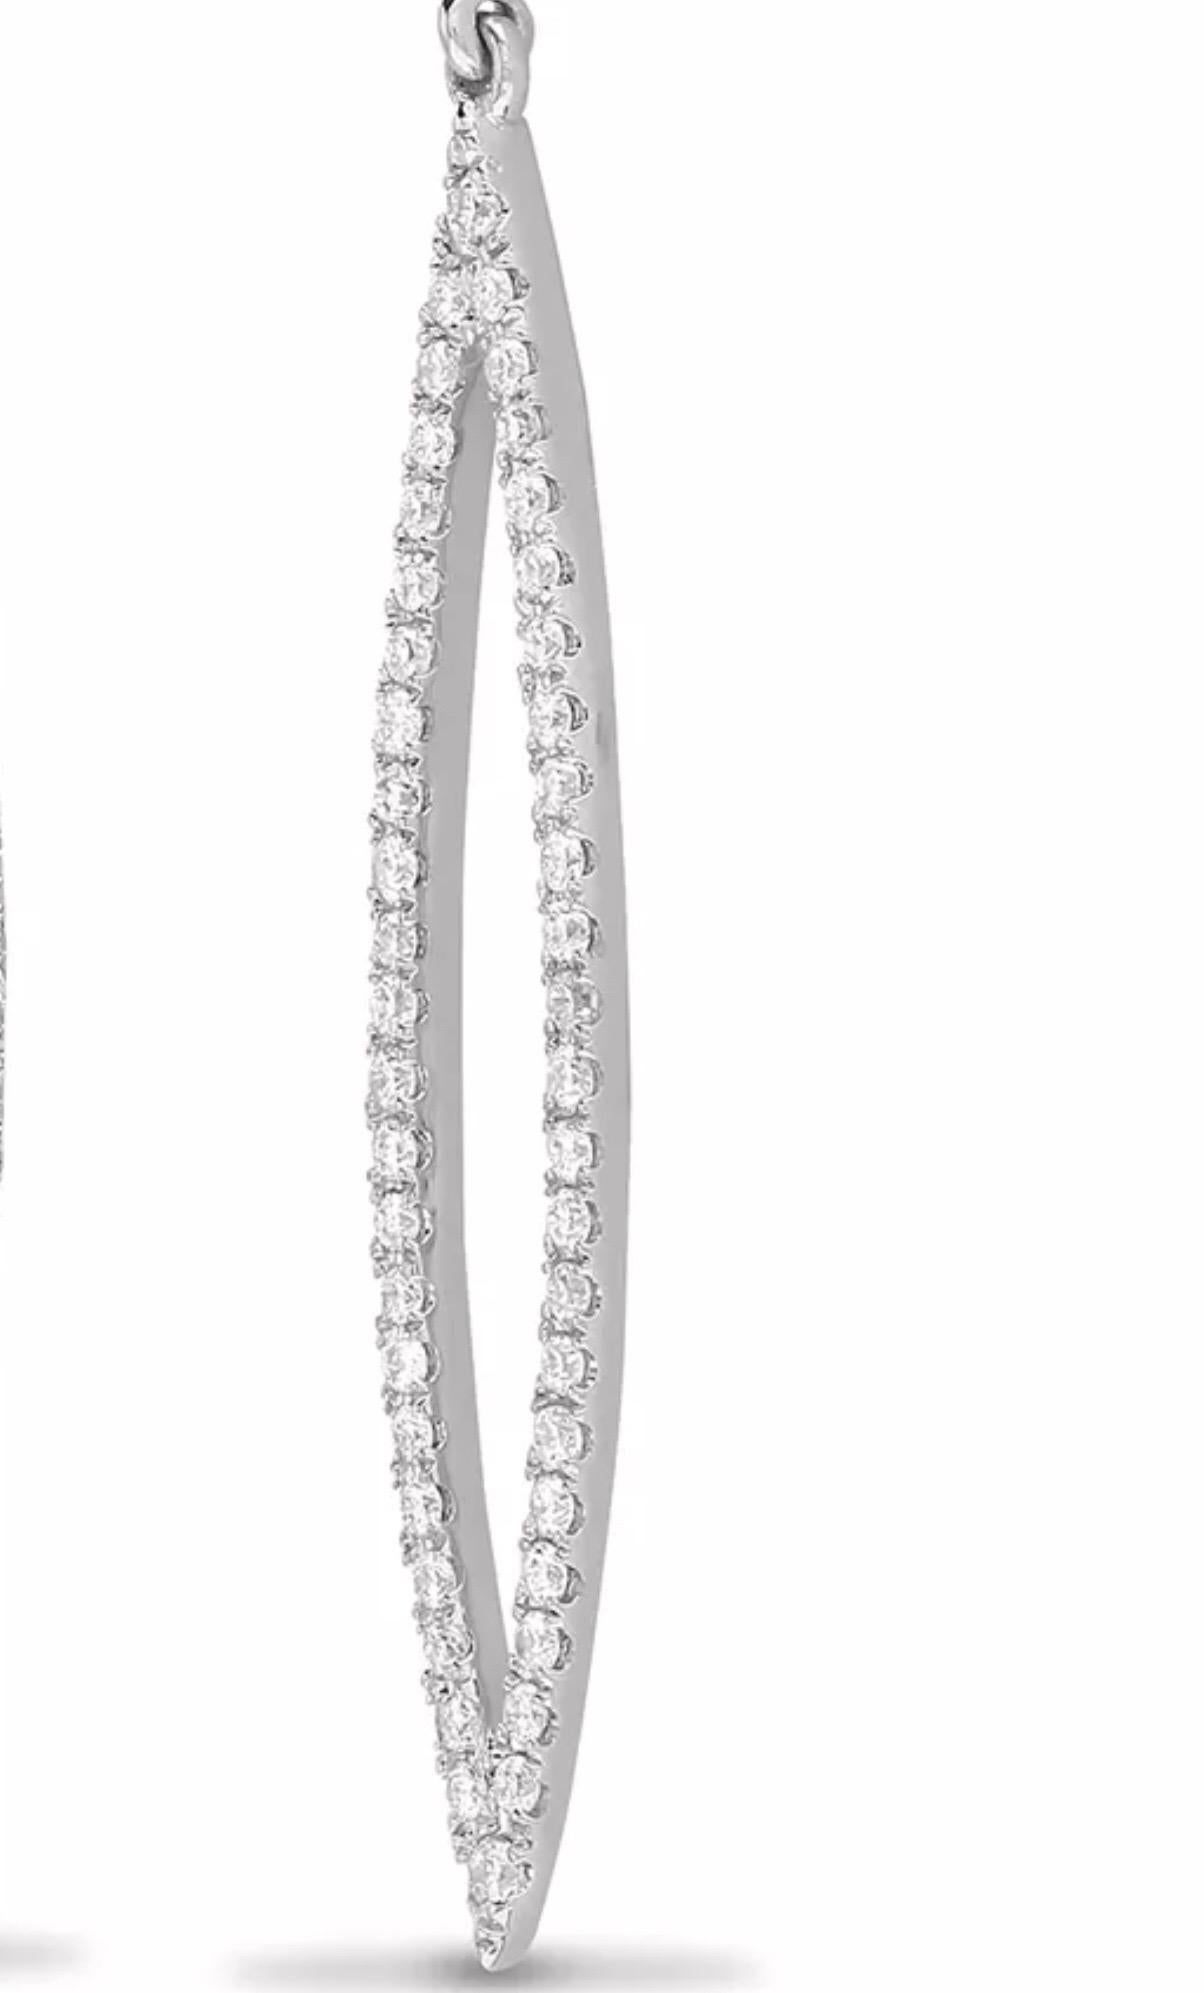 Modern Solid 18 karat white gold pave set round brilliant cut diamond drop earrings,  having 0.60 carat of white diamonds G colour and SI clarity, elegantly presented in a shooting star shape. 18 karat gold post and butterfly for ear backs. British